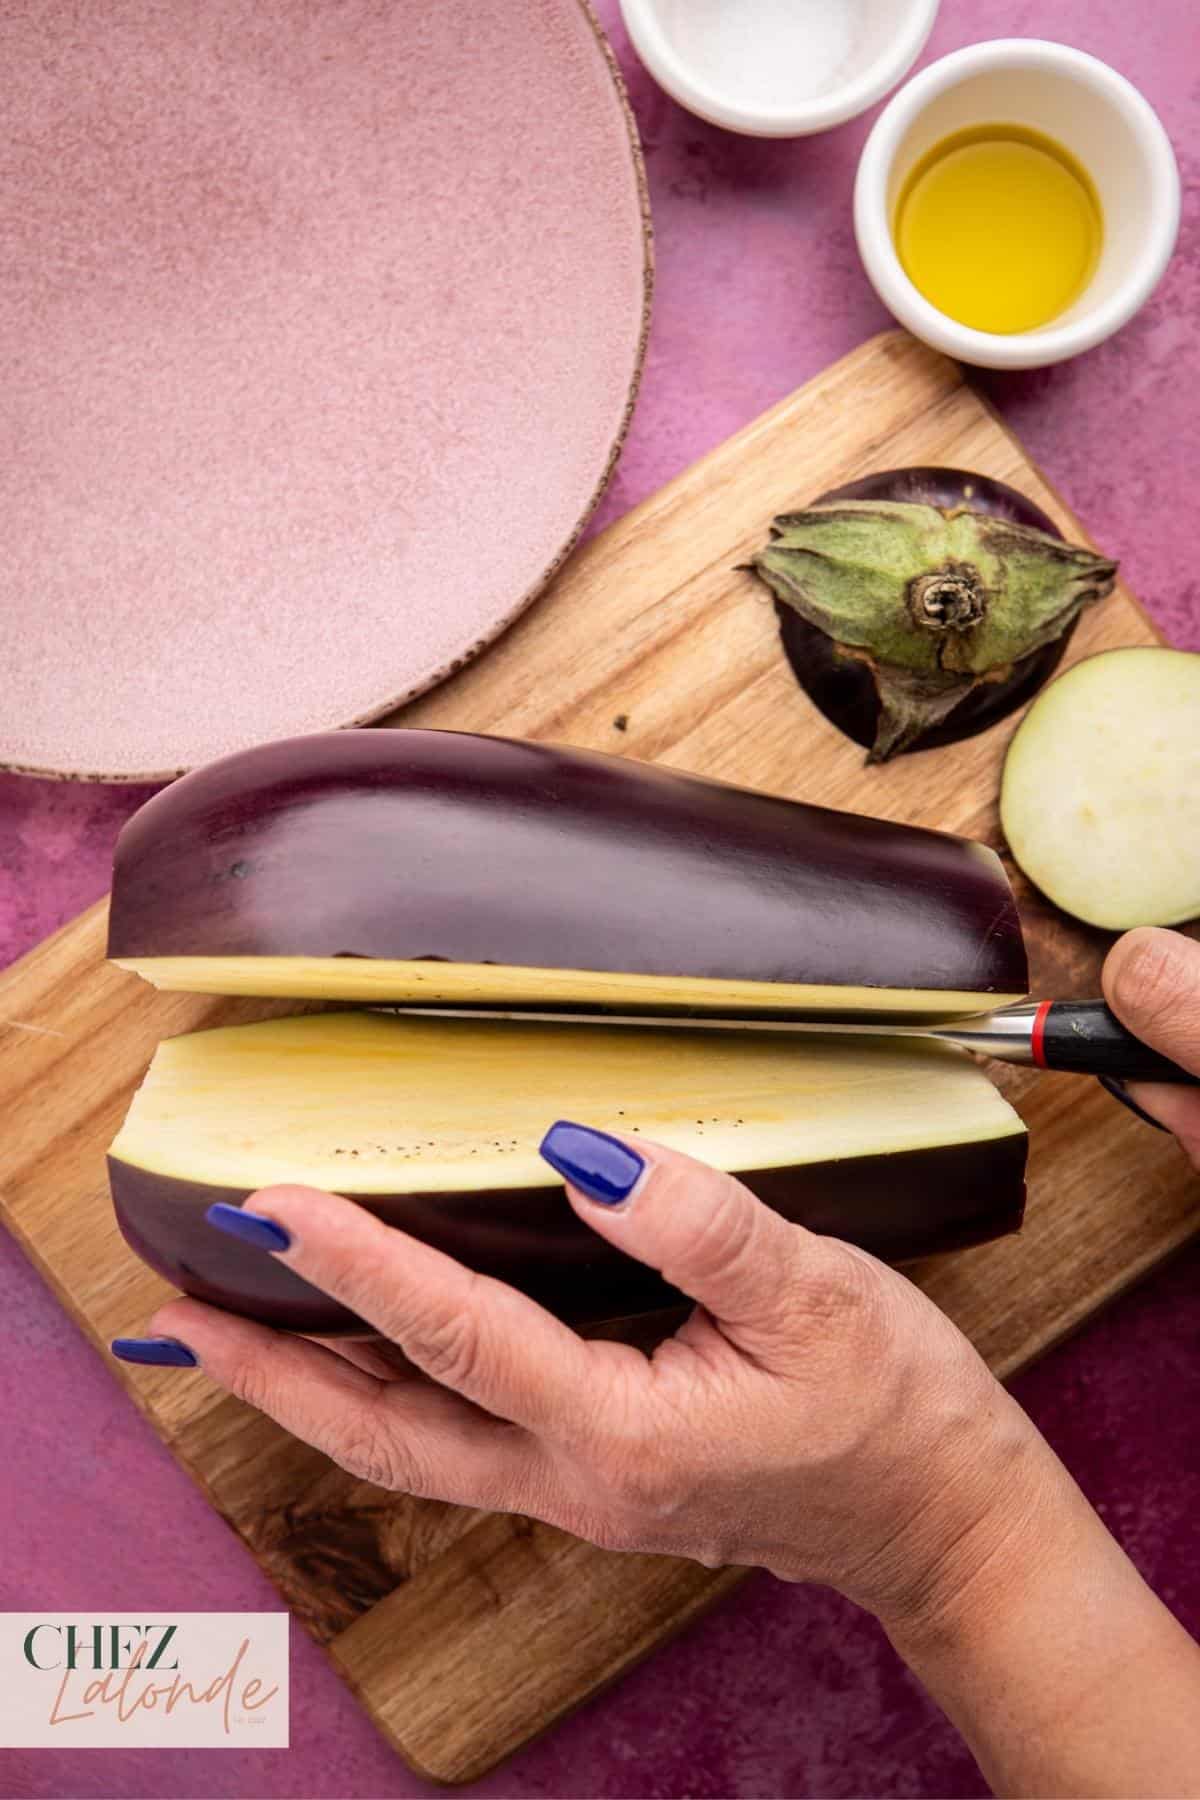 Slicing the eggplant in half for air frying.